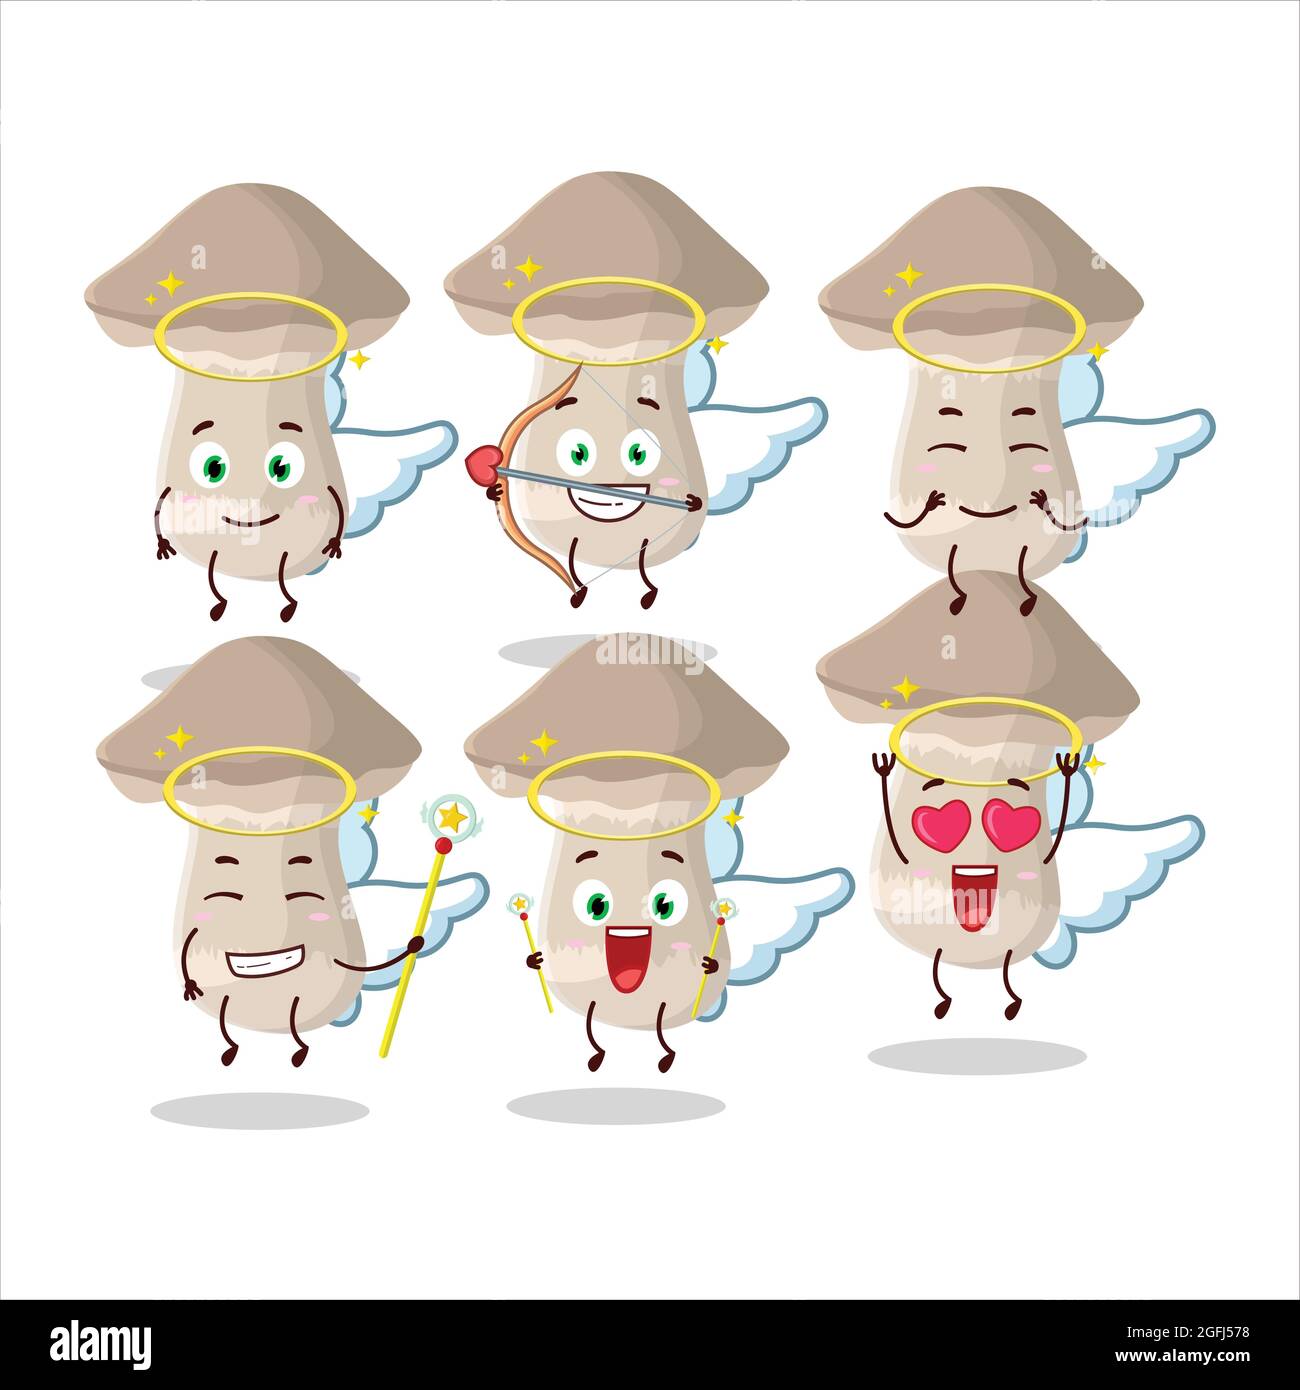 Toadstool cartoon designs as a cute angel character. Vector illustration Stock Vector